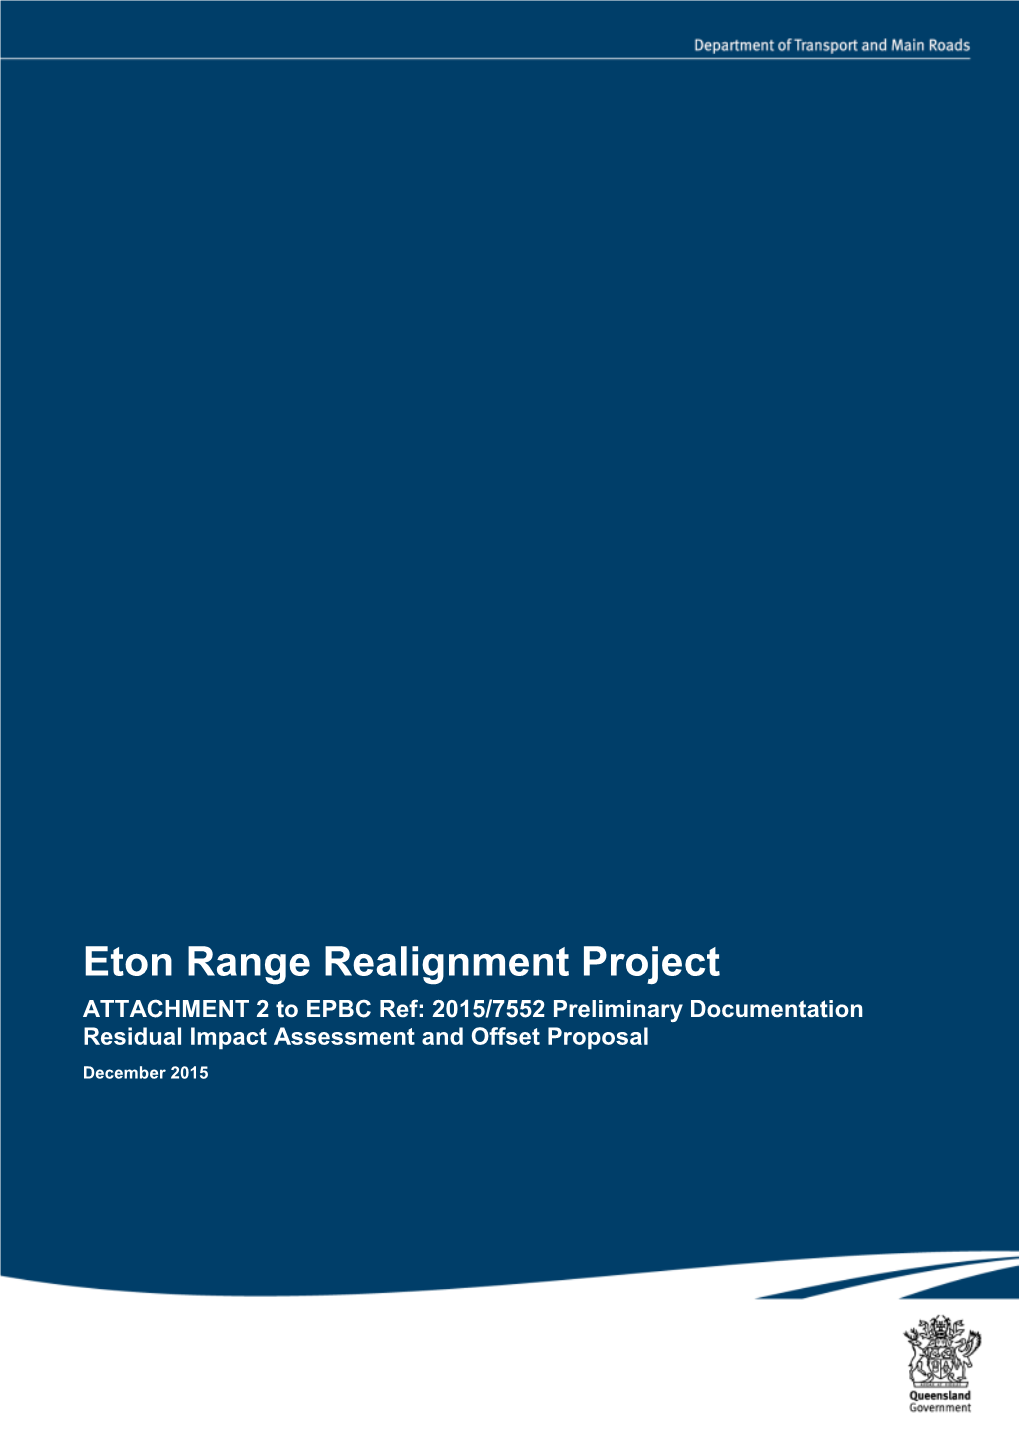 Eton Range Realignment Project ATTACHMENT 2 to EPBC Ref: 2015/7552 Preliminary Documentation Residual Impact Assessment and Offset Proposal December 2015